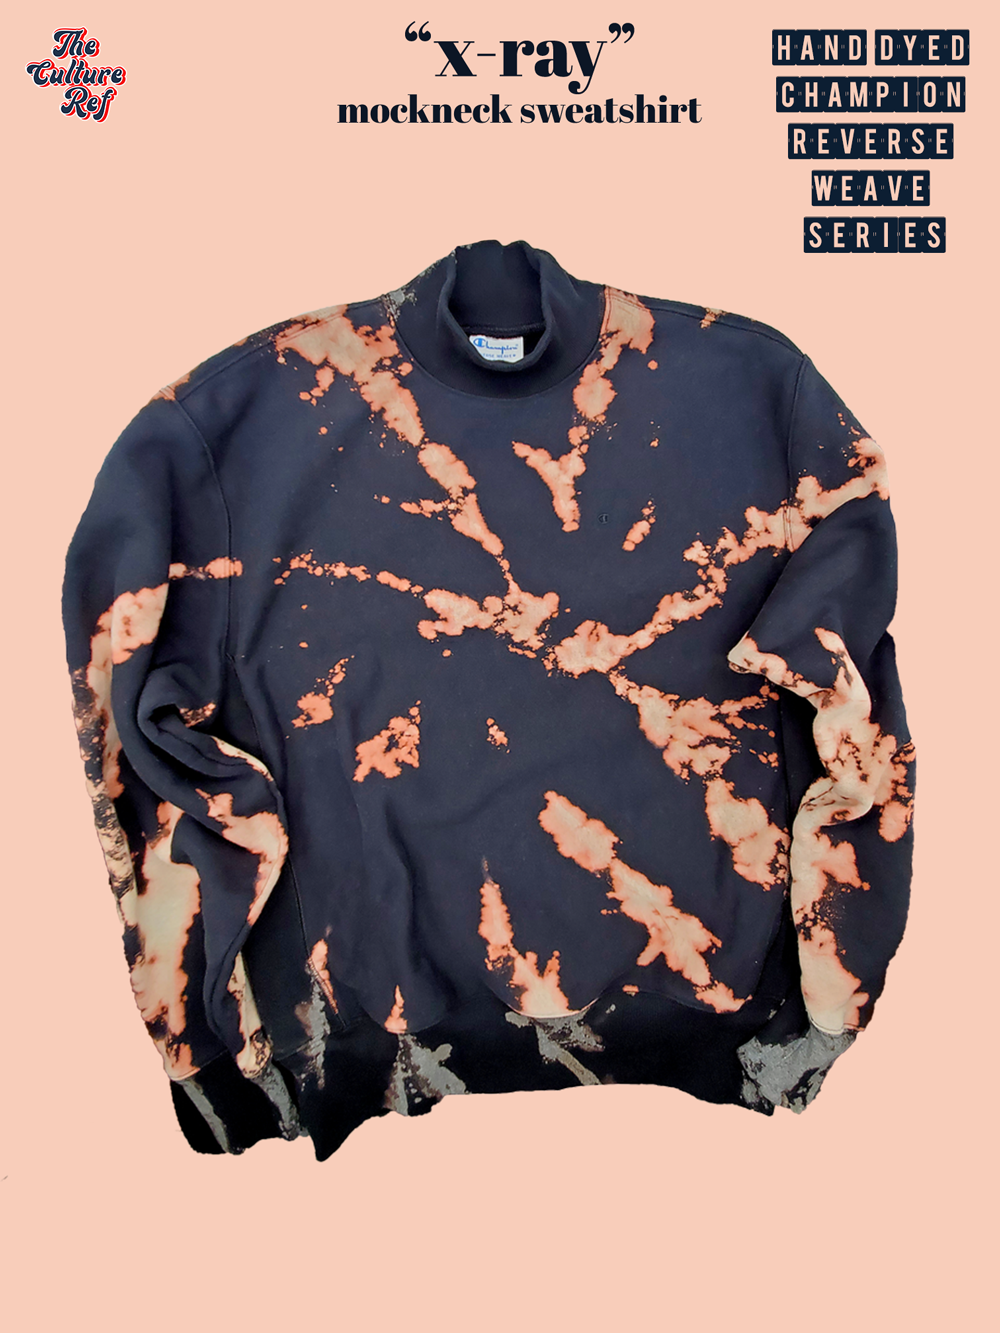 Black "X-Ray" Mockneck Sweatshirt - Hand Dyed Champion Reverse Weave | The Culture Ref Tie Dye Limited Series